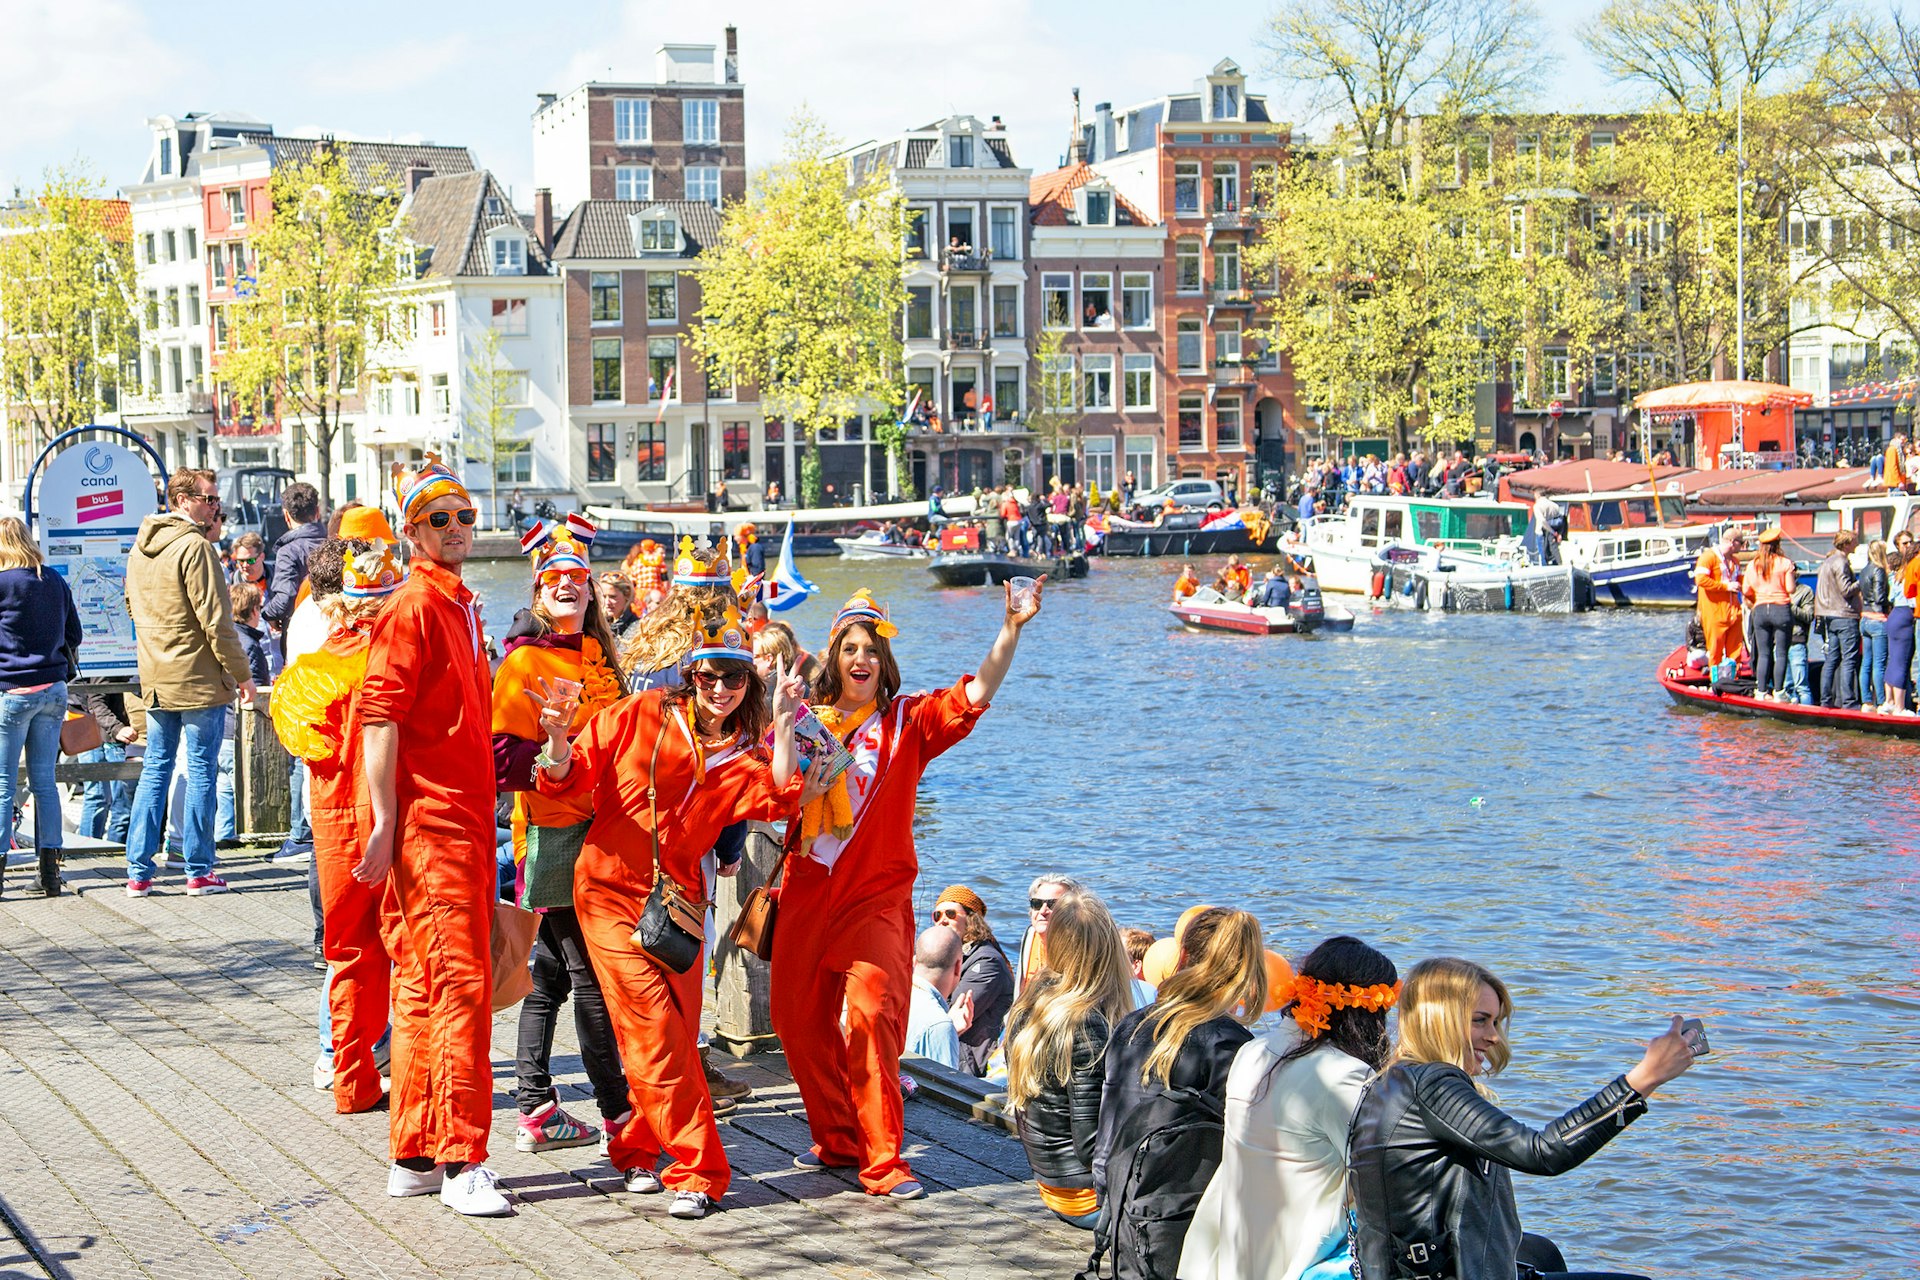 Revellers, mainly dressed in orange, party beside a canal